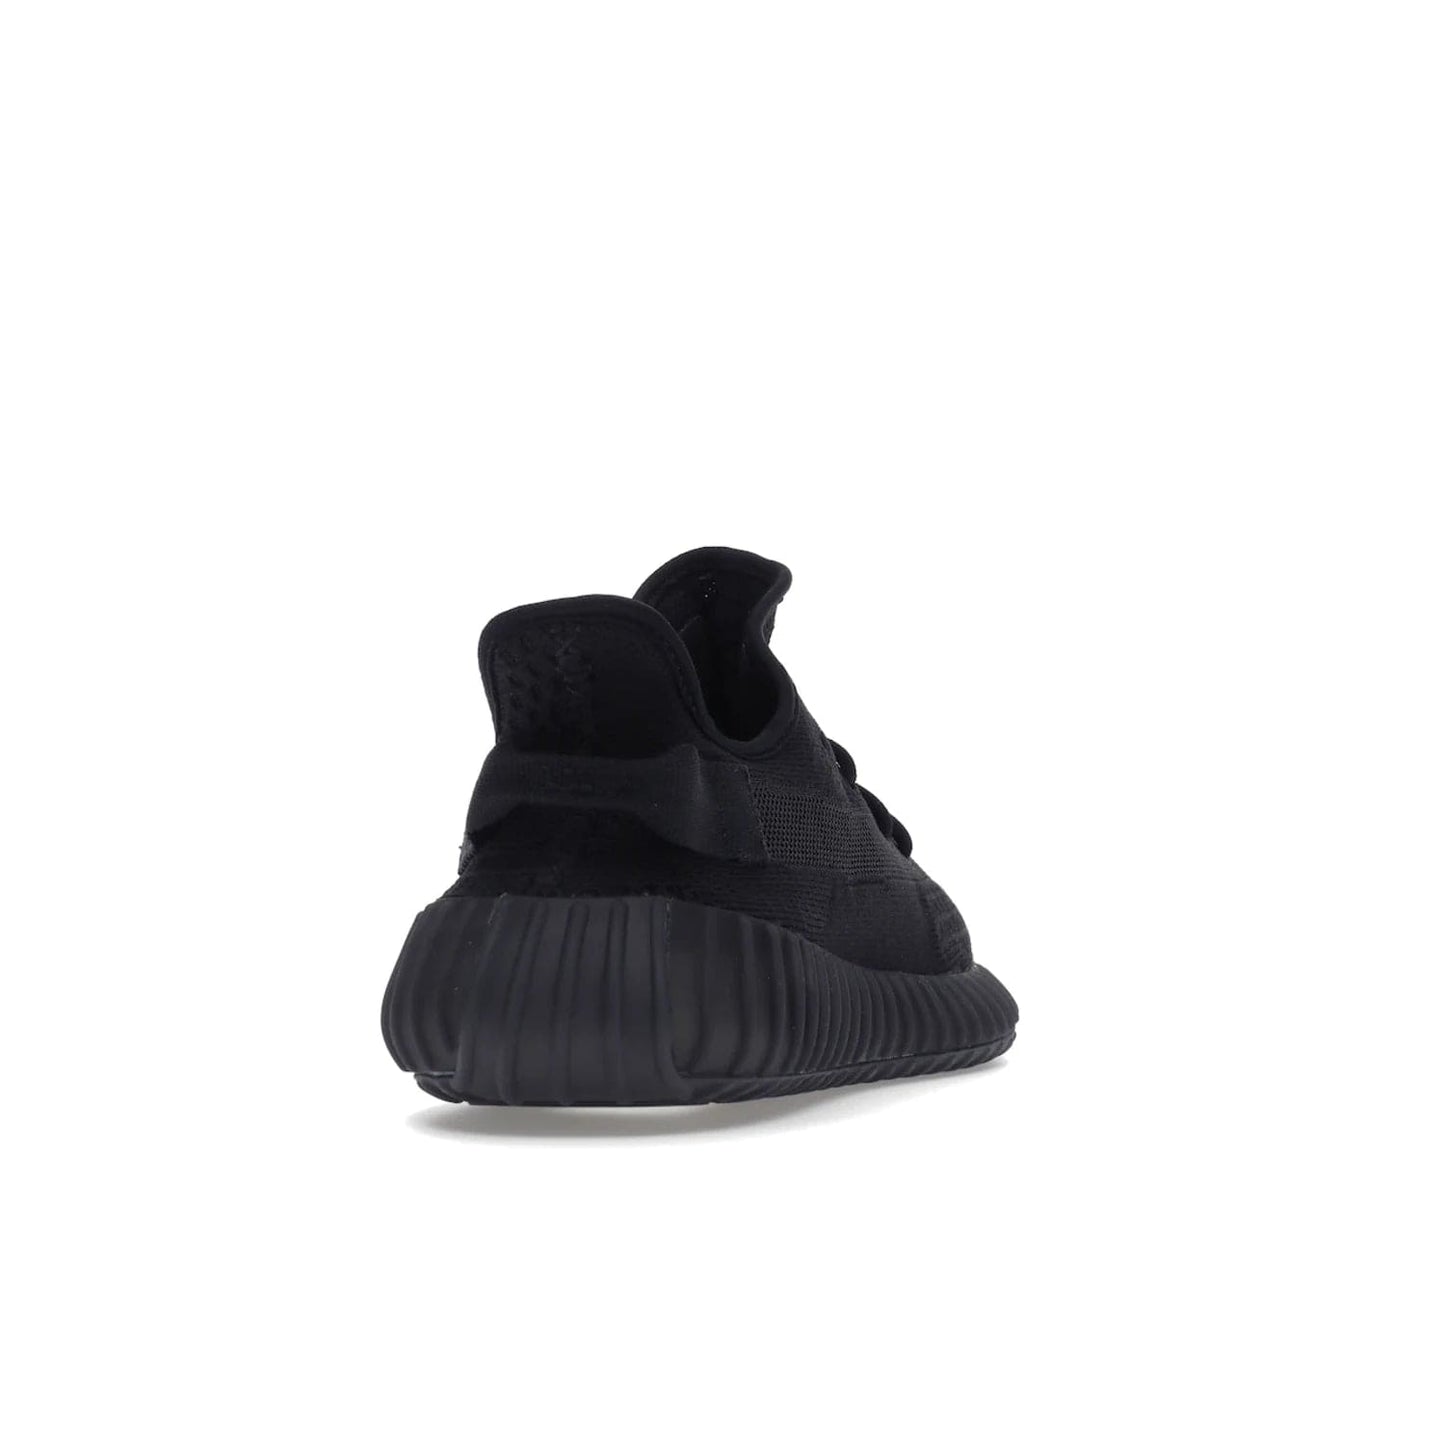 adidas Yeezy Boost 350 V2 Onyx - Image 30 - Only at www.BallersClubKickz.com - Adidas Yeezy Boost 350 V2 Onyx Triple Black shoes for comfort and style. Arriving Spring 2022.